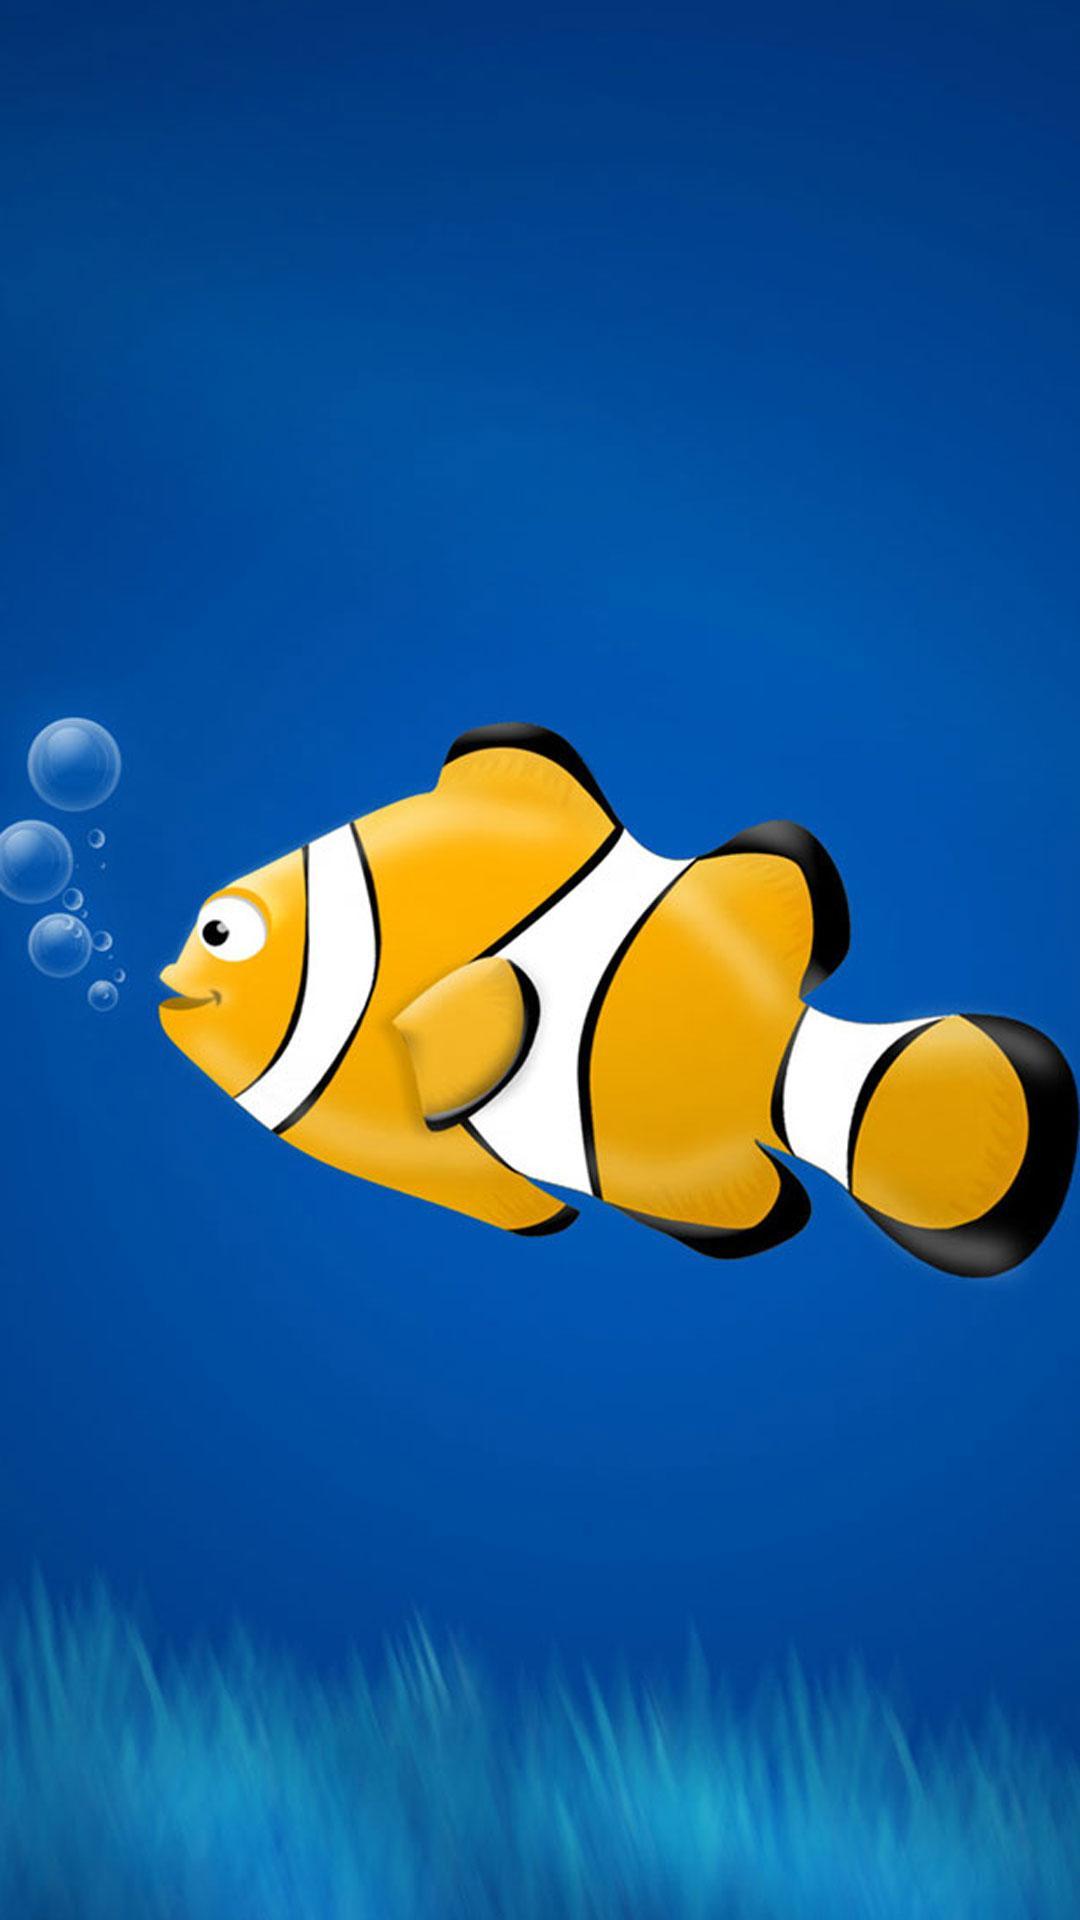 Clownfish Live Wallpaper for Android